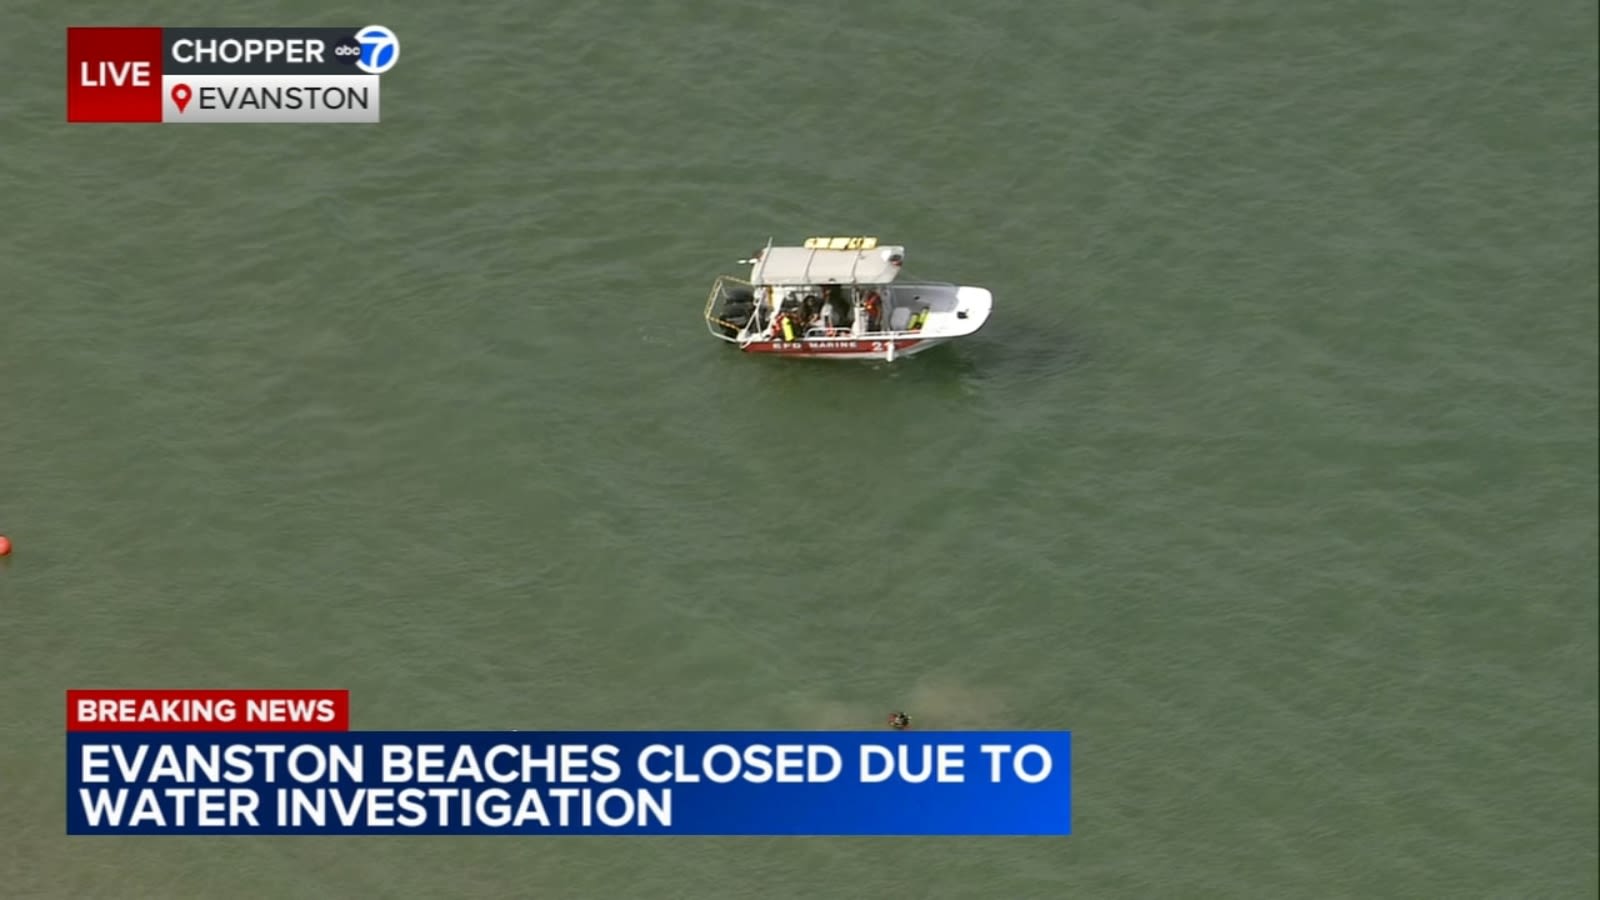 Evanston beaches closed as crews search for missing swimmer, police say | LIVE